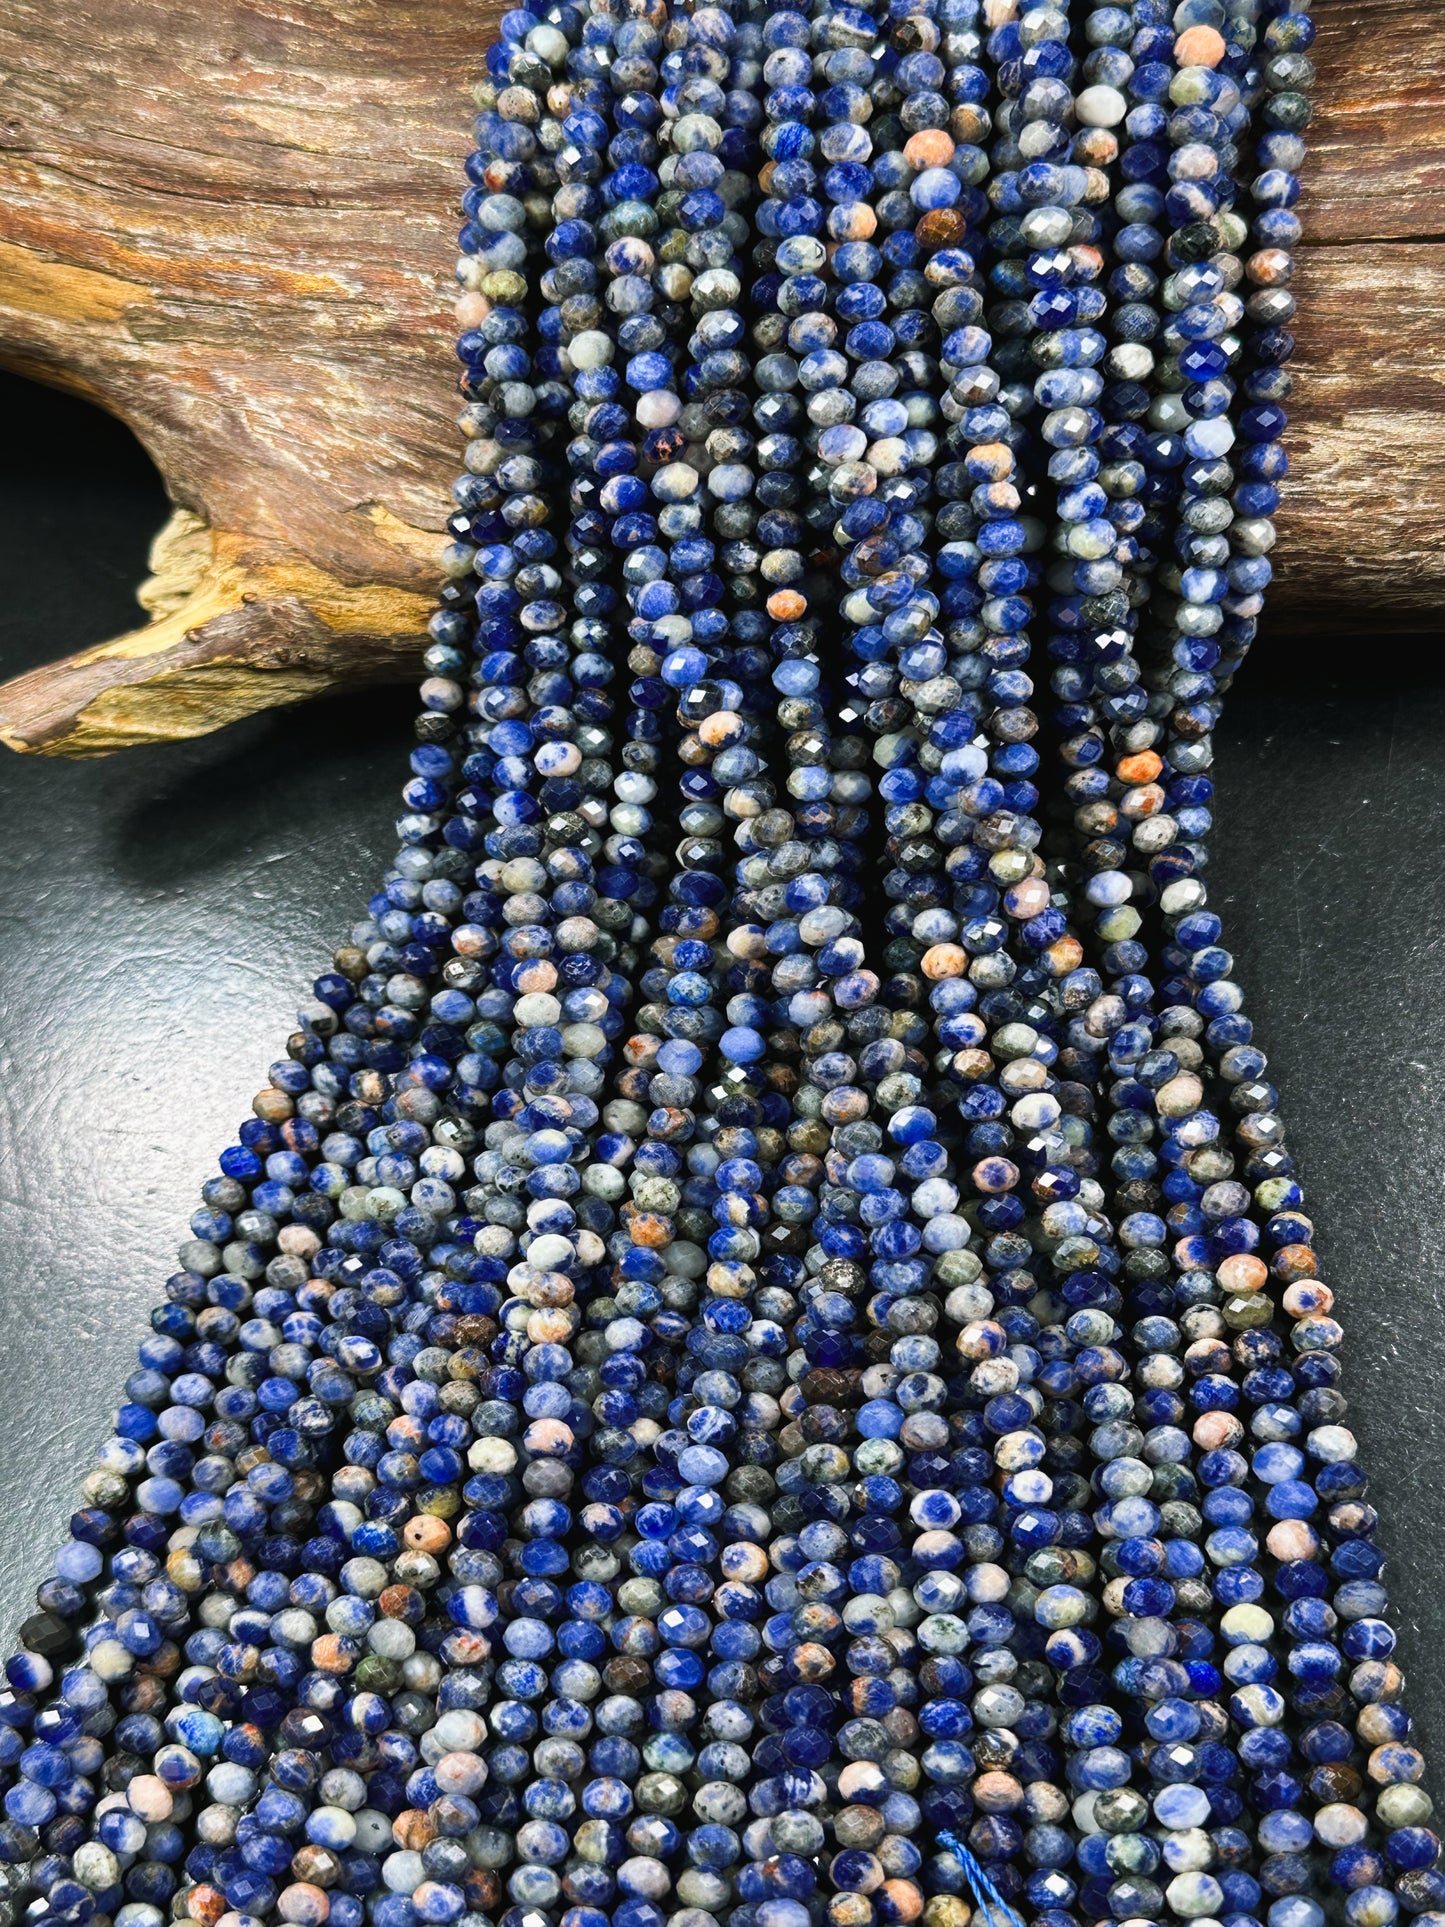 Natural Sunset Sodalite Gemstone Bead Faceted 5x4mm Rondelle Shape Bead, Beautiful Natural Royal Blue White Orange Color Sodalite Bead 15.5"